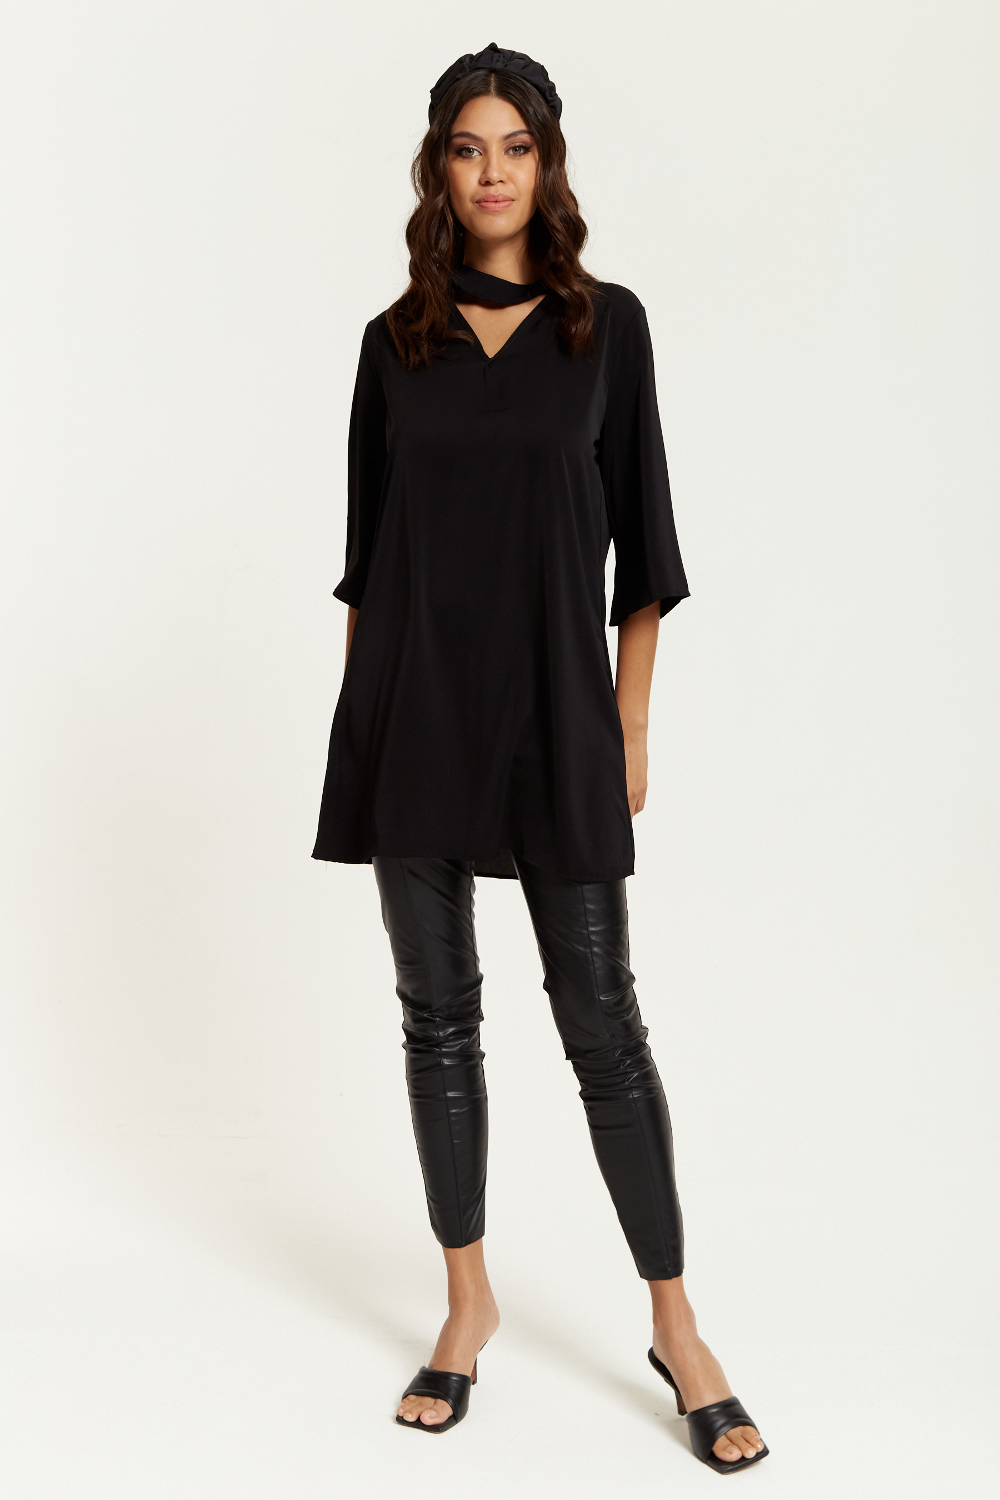 Oversized Detailed Neckline Tunic with 3/4 Sleeves in Black GLR FASHION NETWORKING